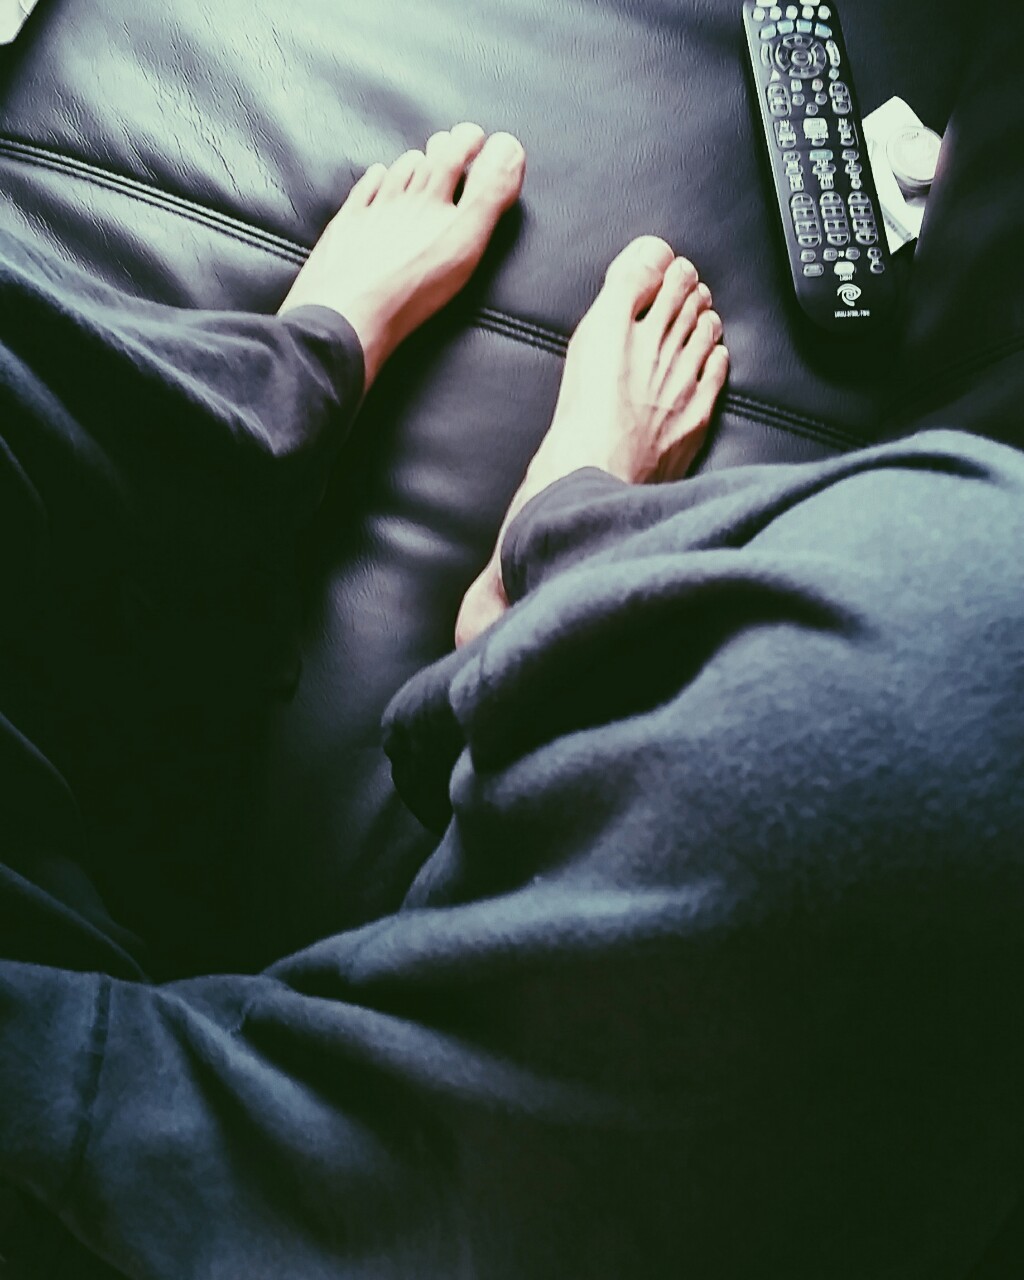 bearinboots75:  myfeetlife:  My feet are just a tad larger than the remote! I have